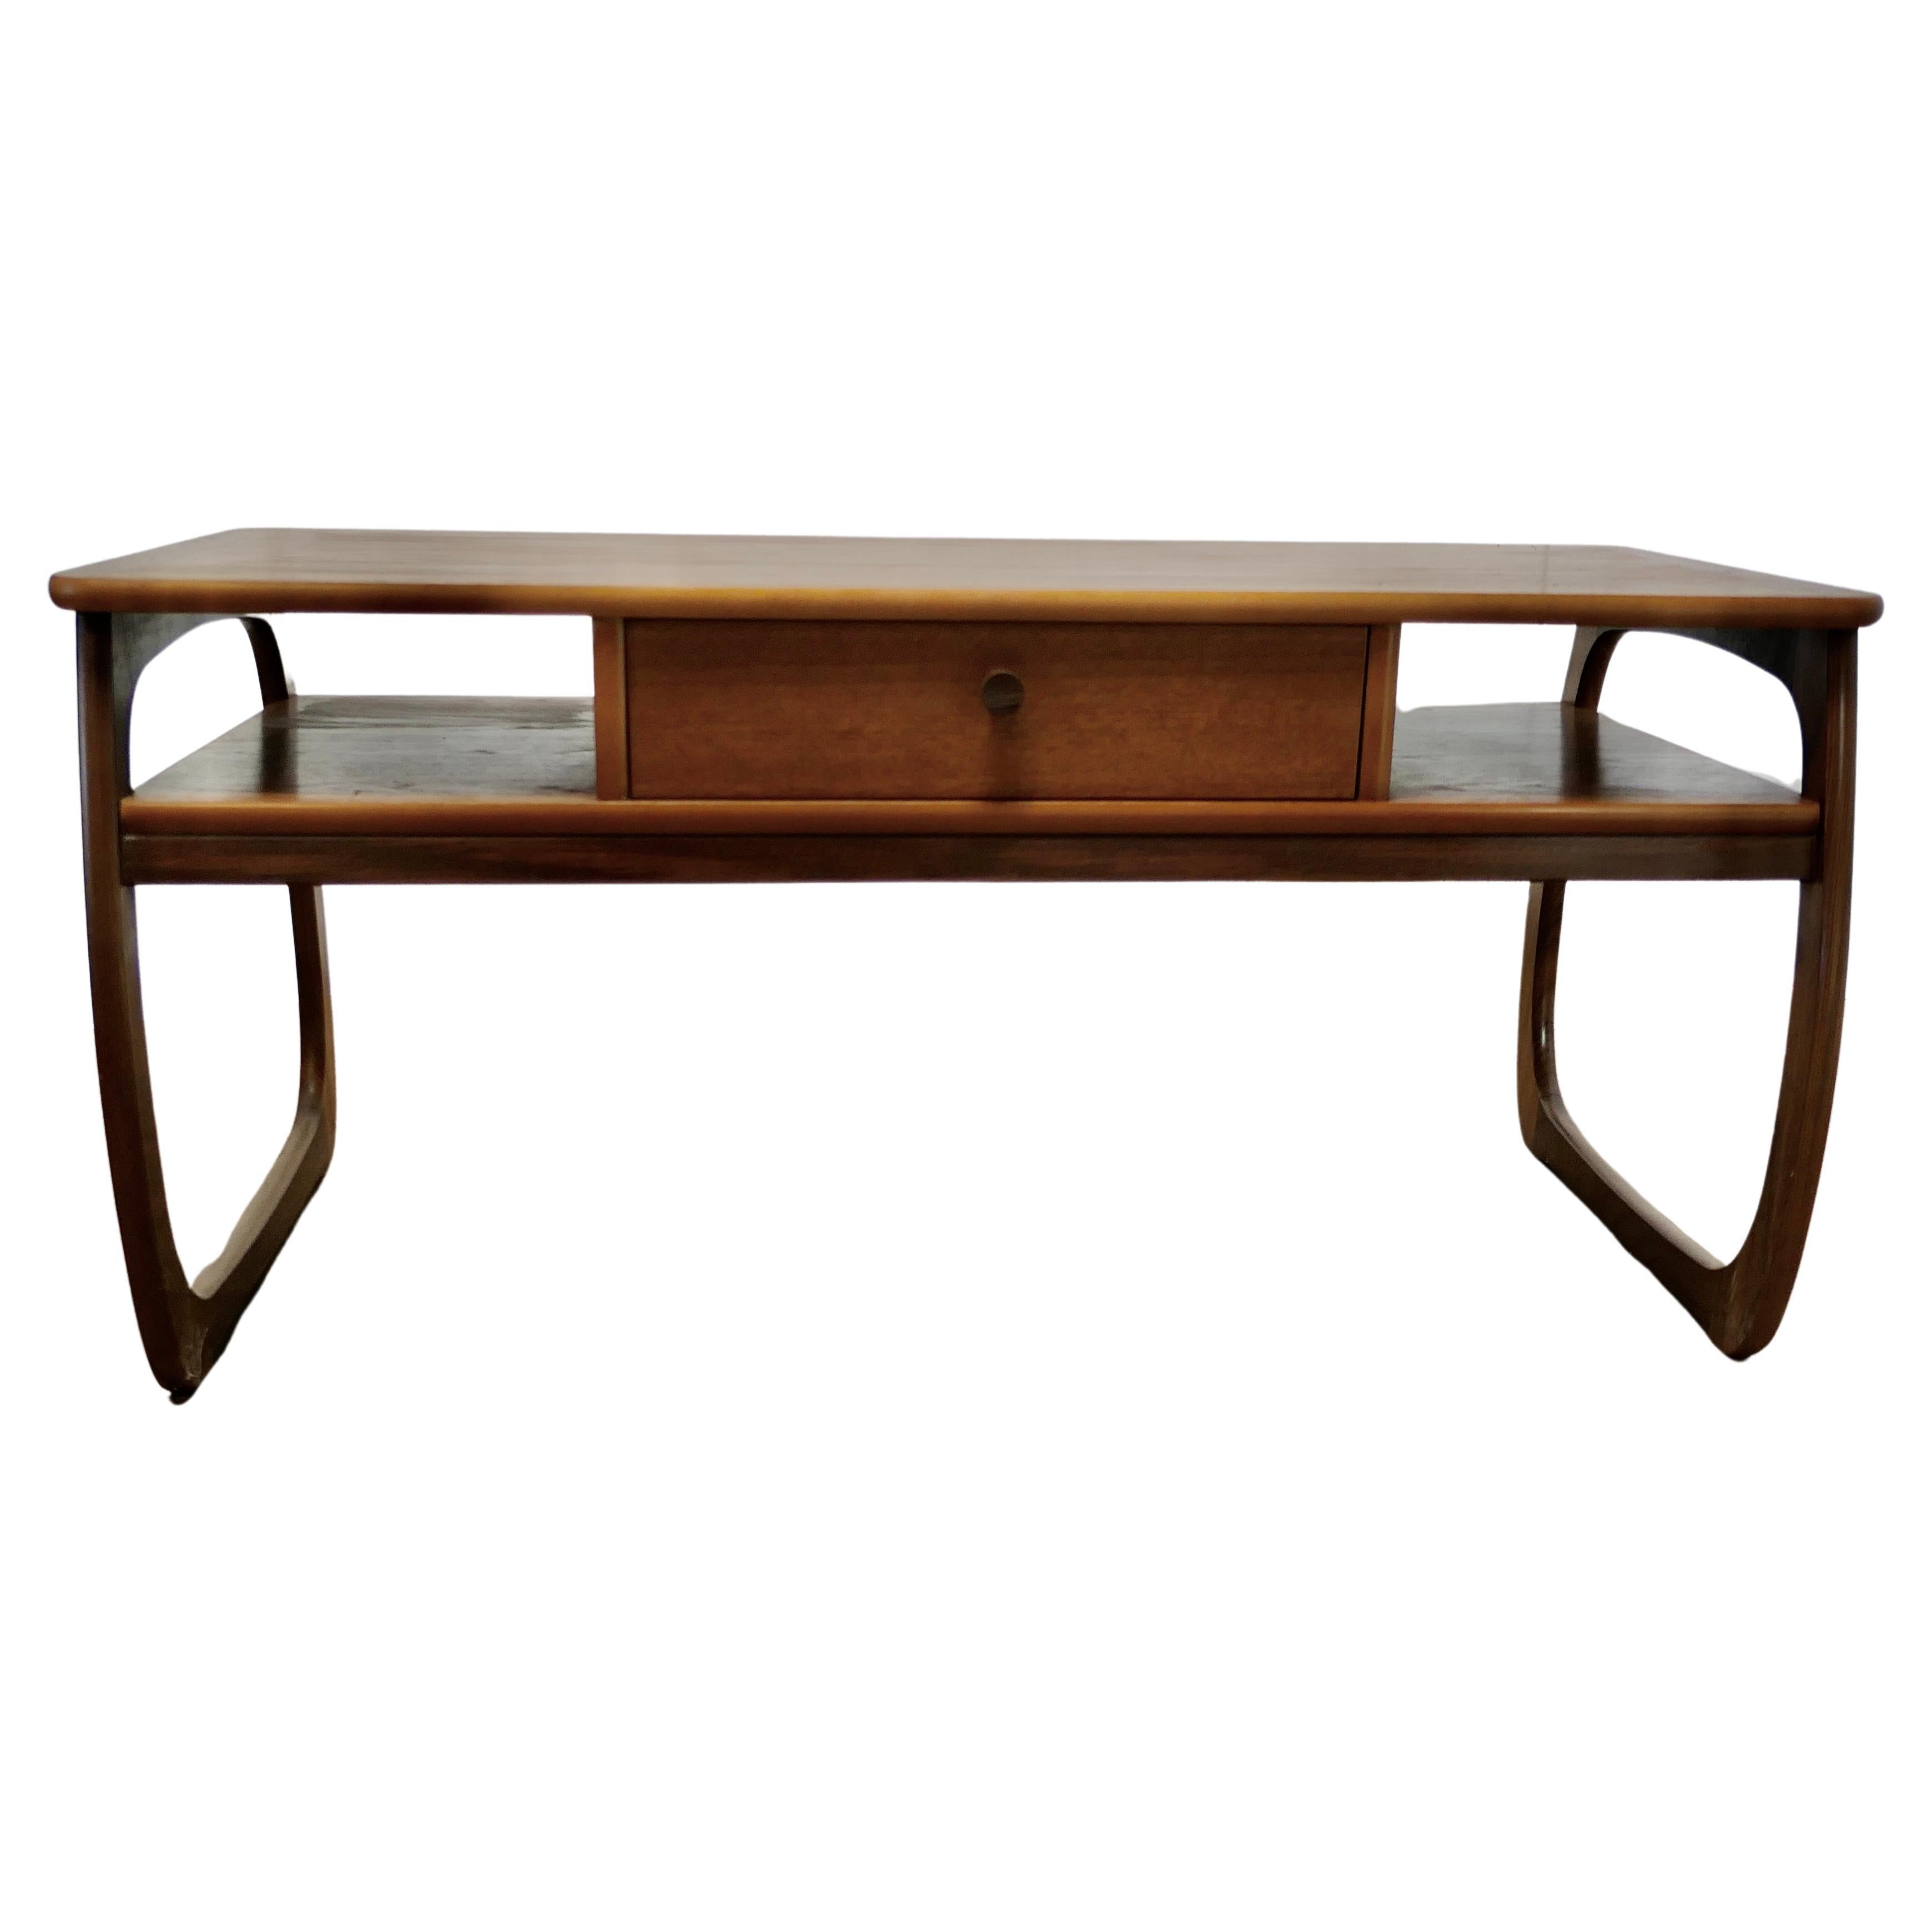 Long 1950s Parker Knoll Cube Shape Coffee Table  This is a good sturdy table  For Sale